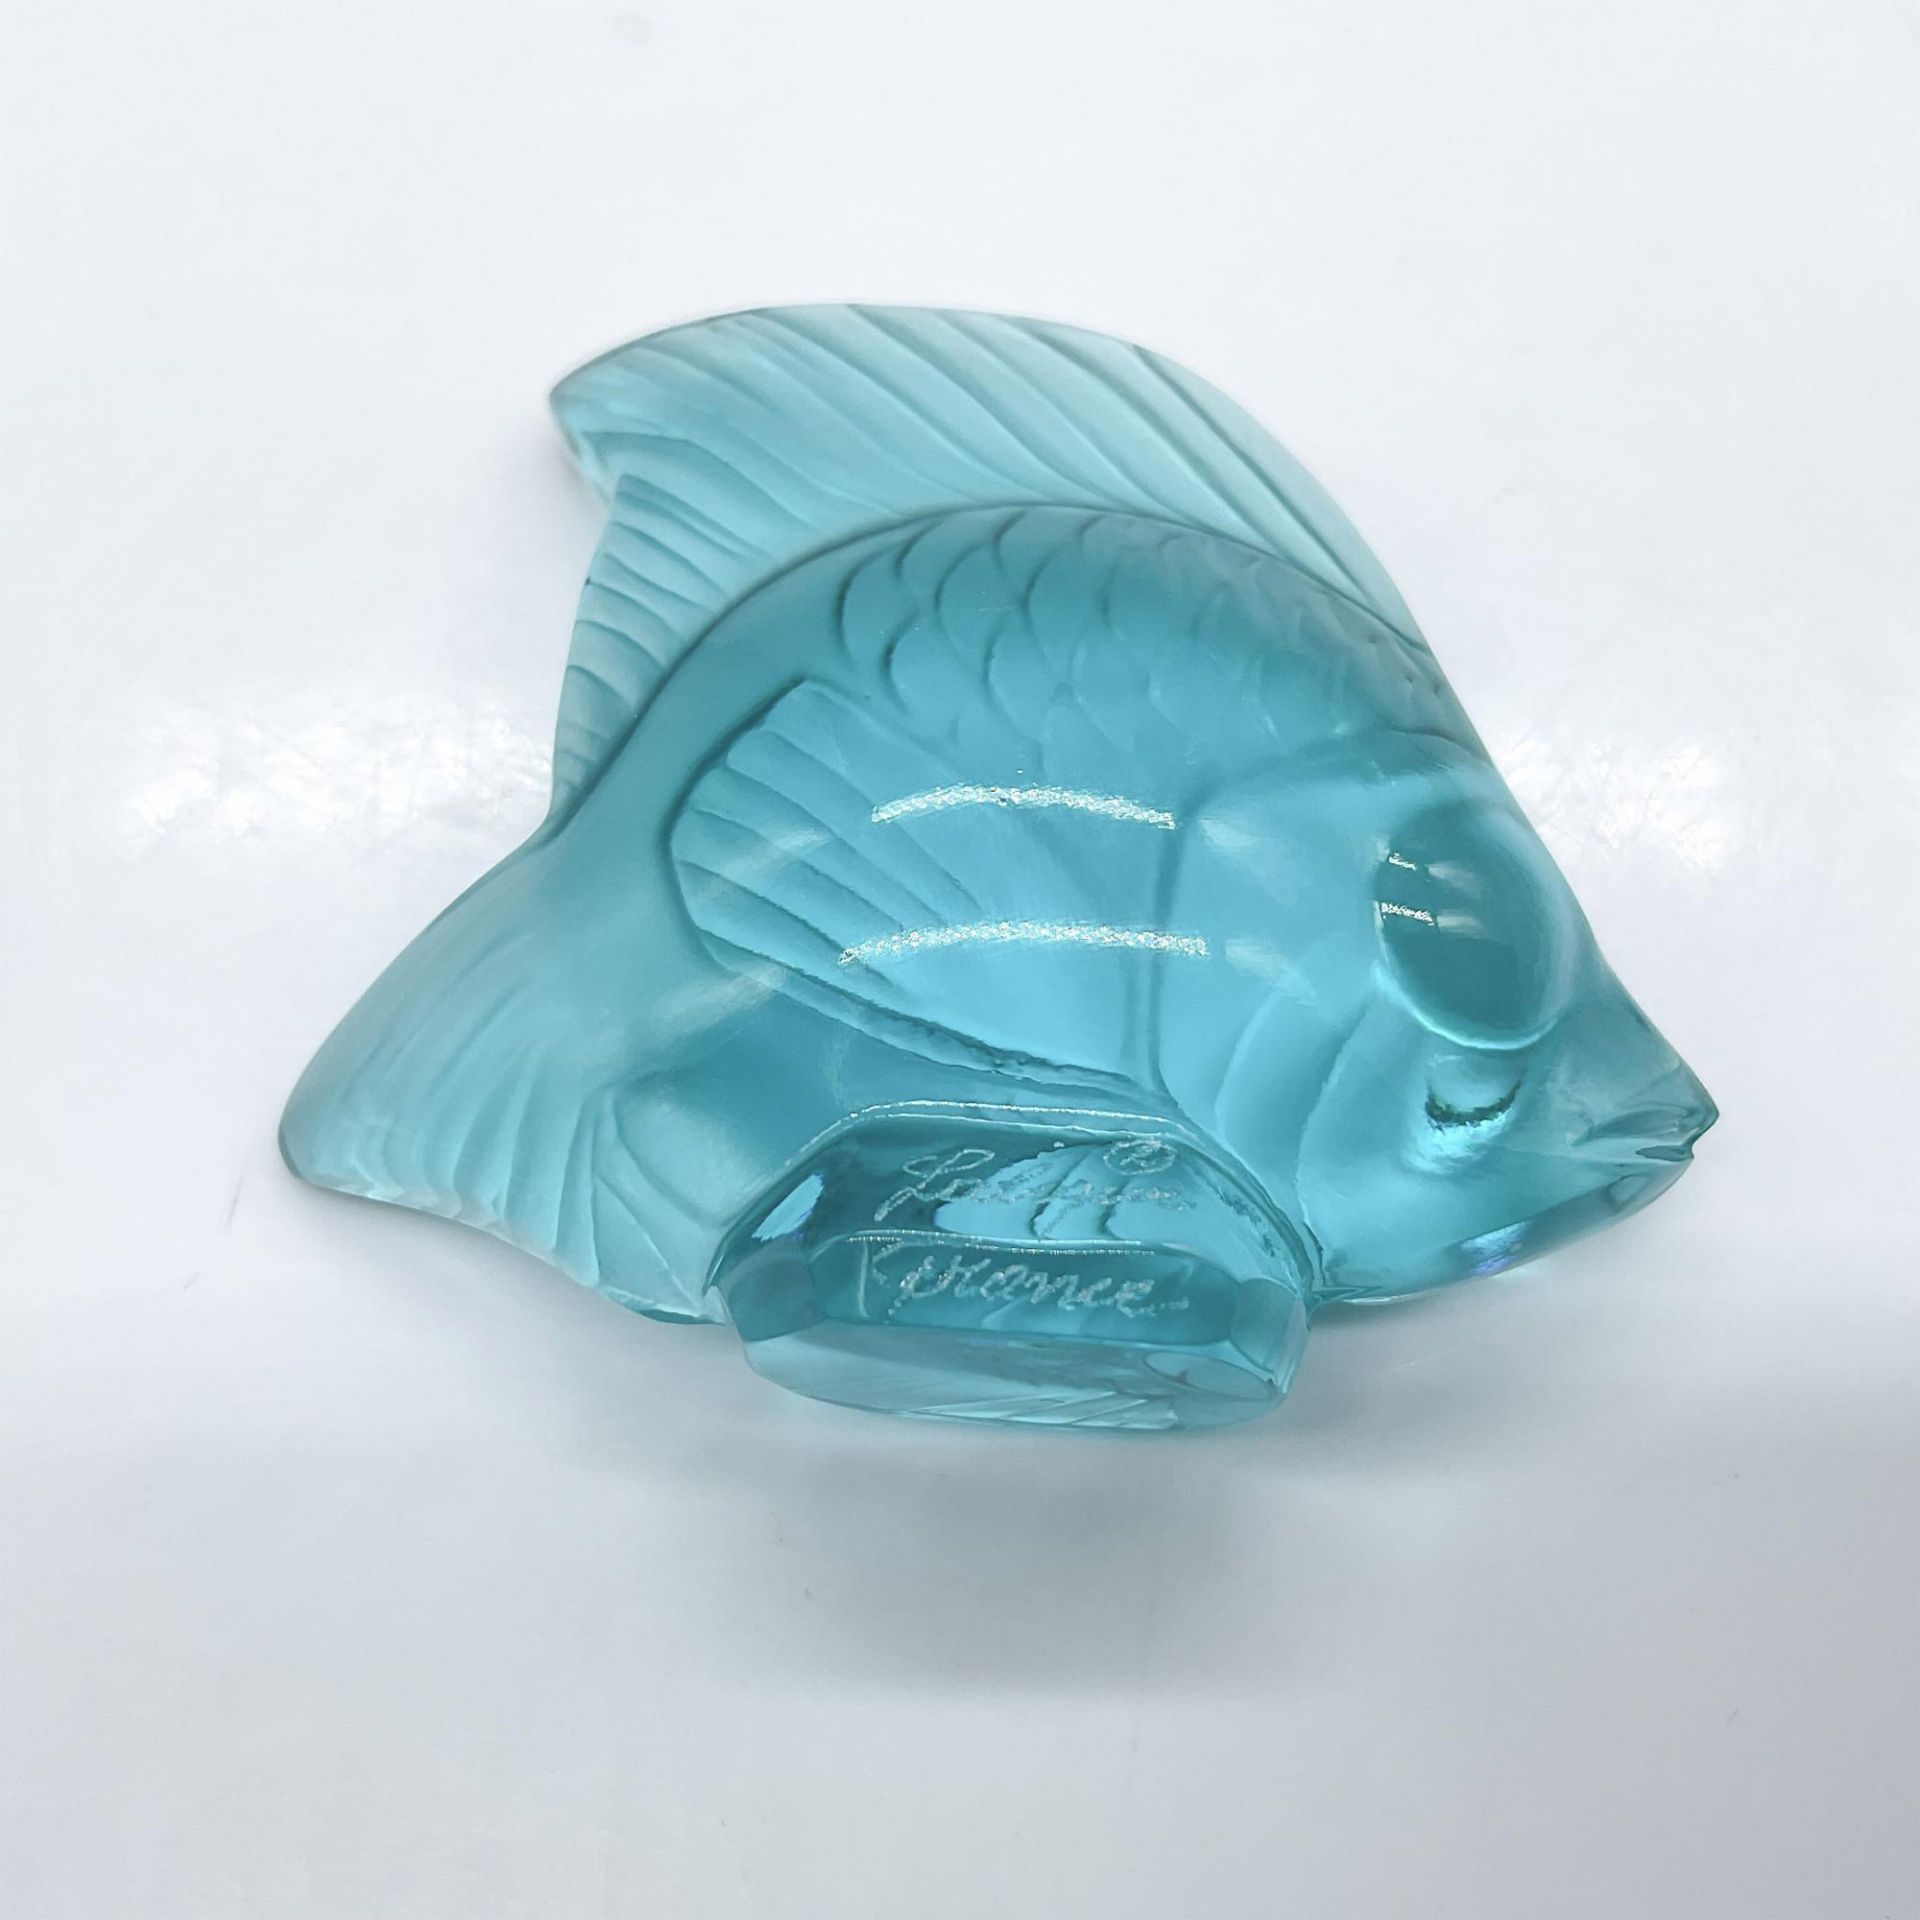 Lalique Glass Turquoise Fish Figurine - Image 3 of 3